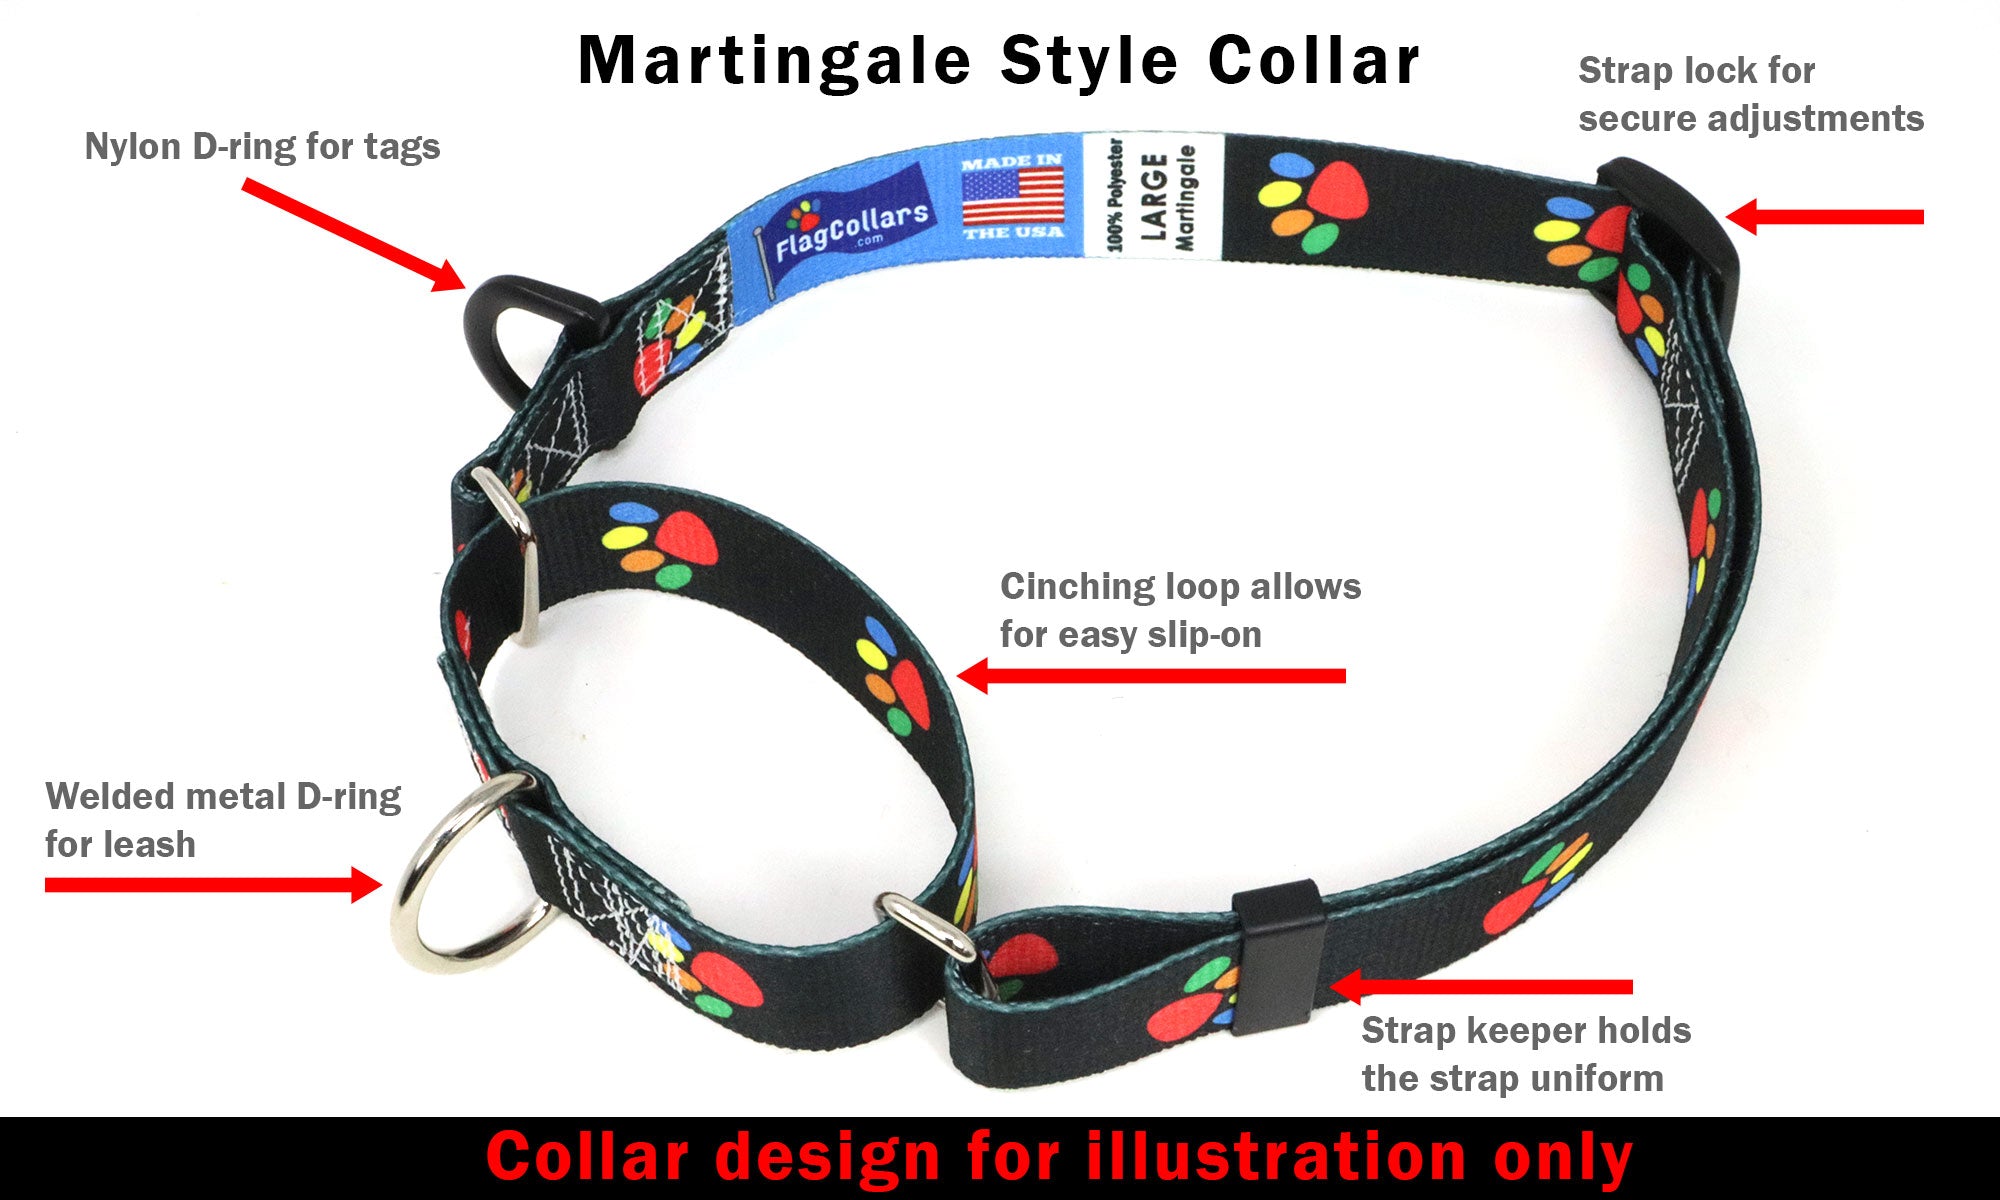 Belize Dog Collar for Soccer Fans | Black or Pink | Quick Release or Martingale Style | Made in NJ, USA